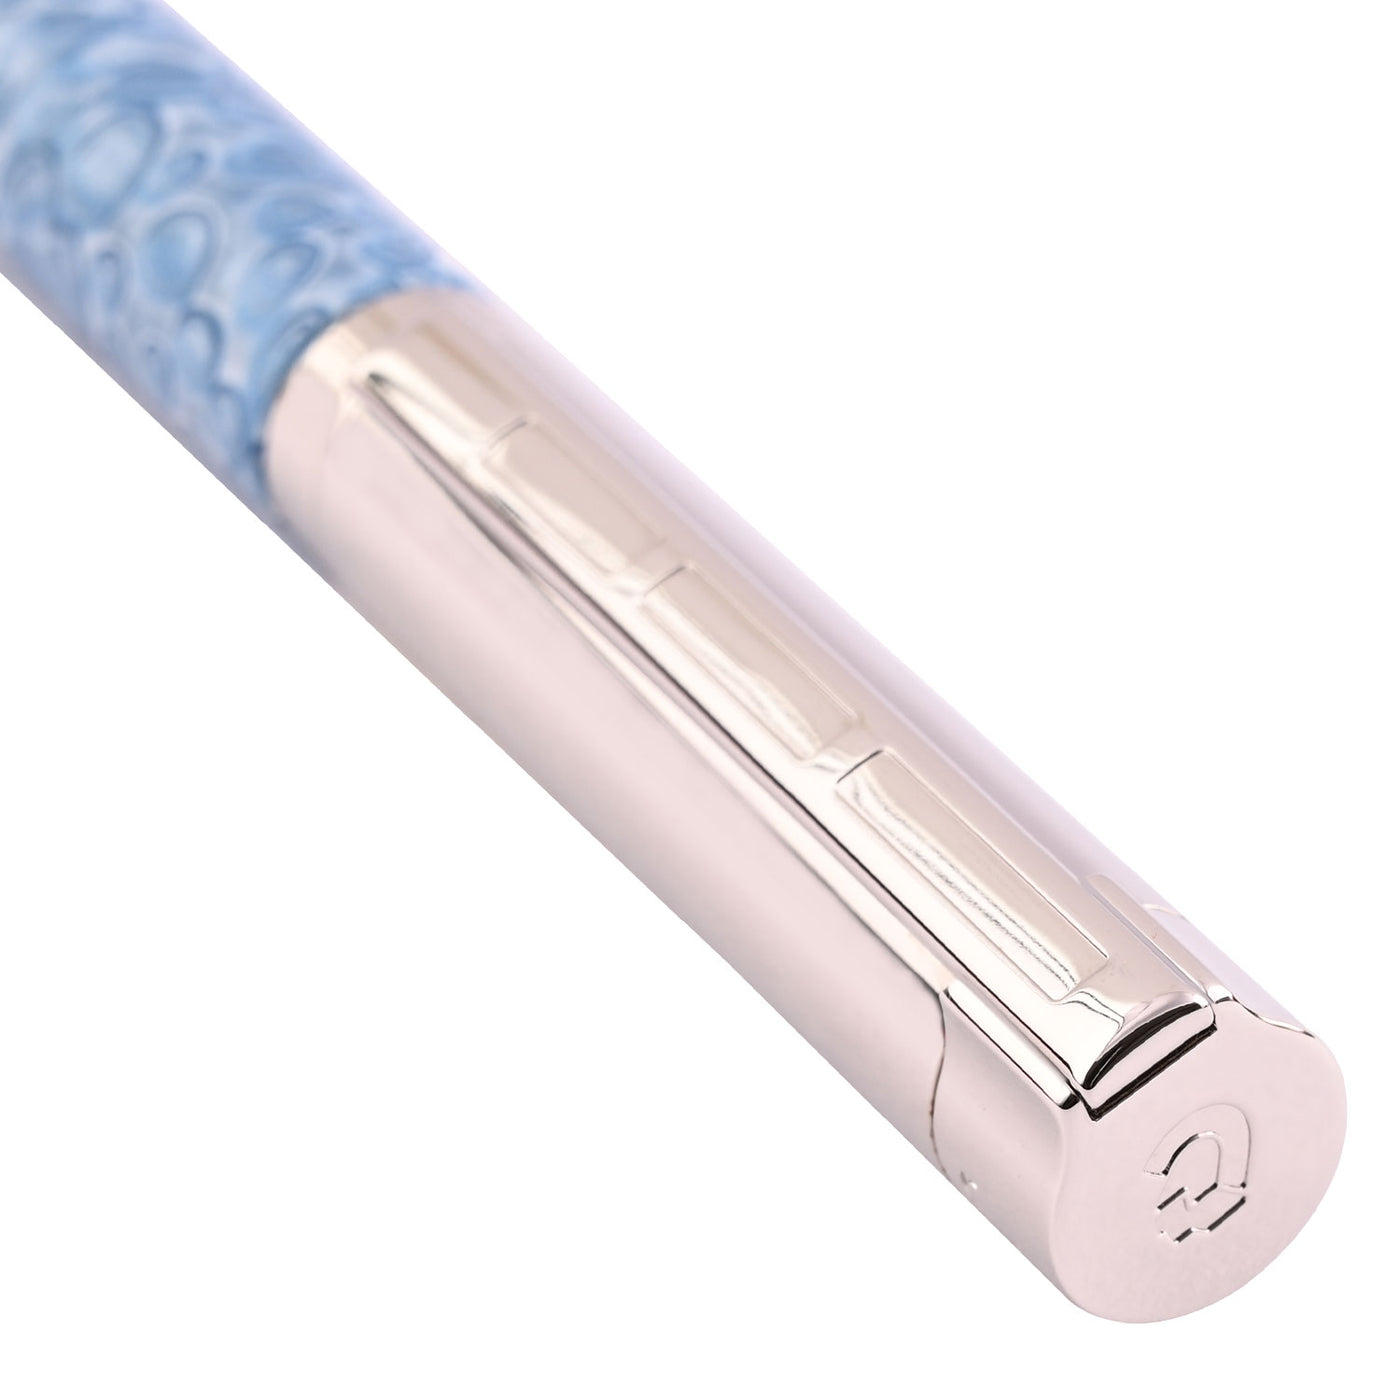 Staedtler Premium Pen of the Season Fountain Pen - Blue CT (Limited Edition) 4